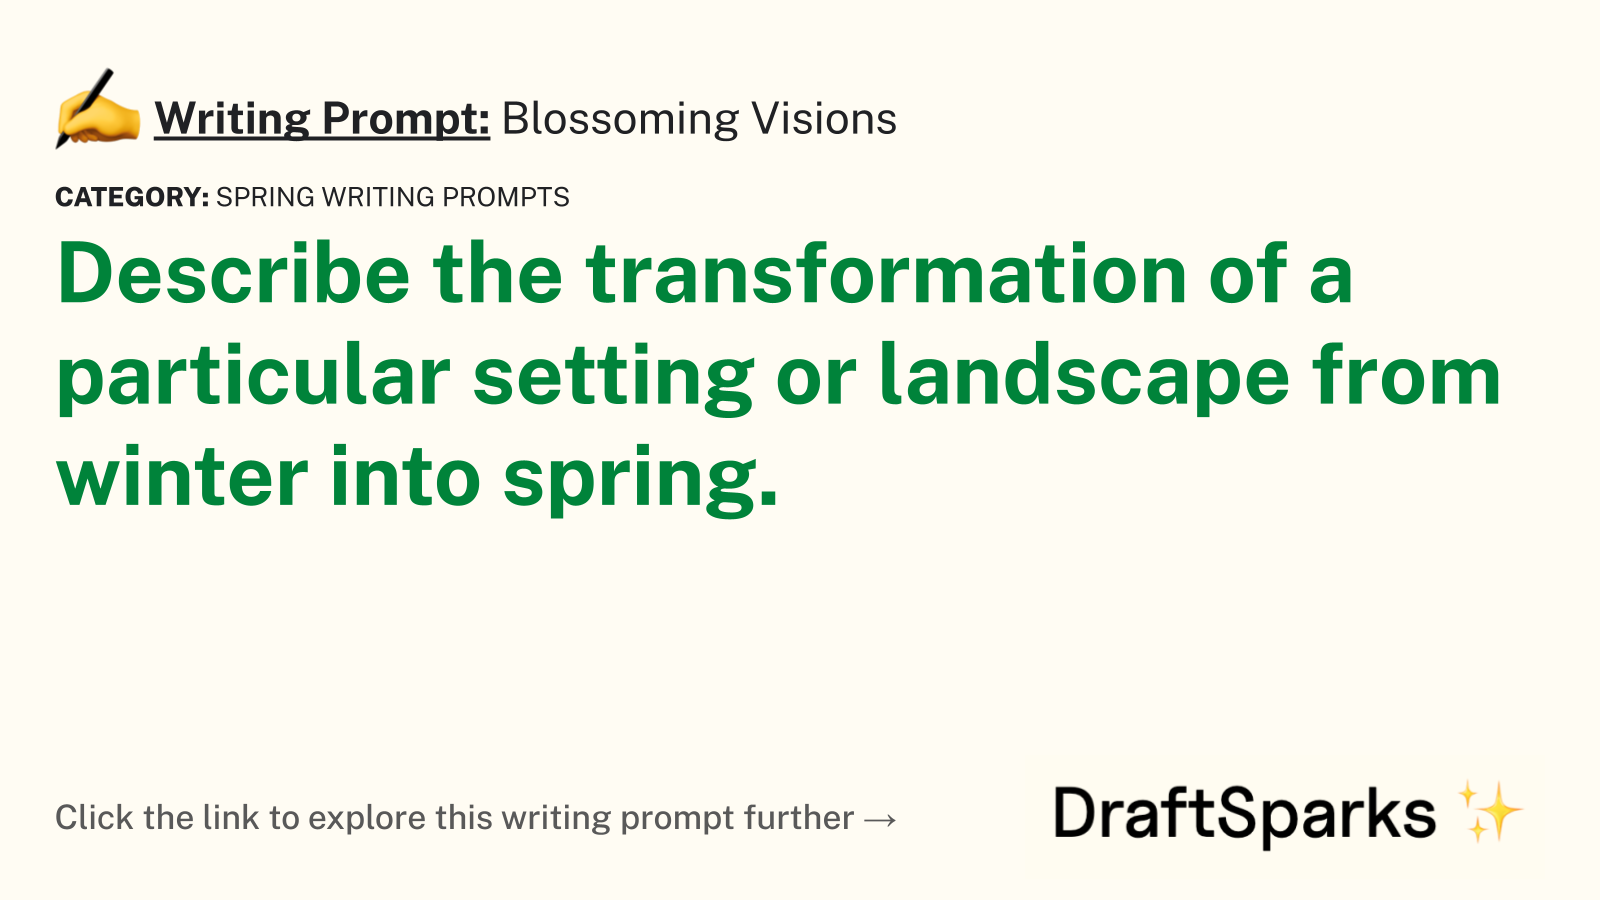 Blossoming Visions